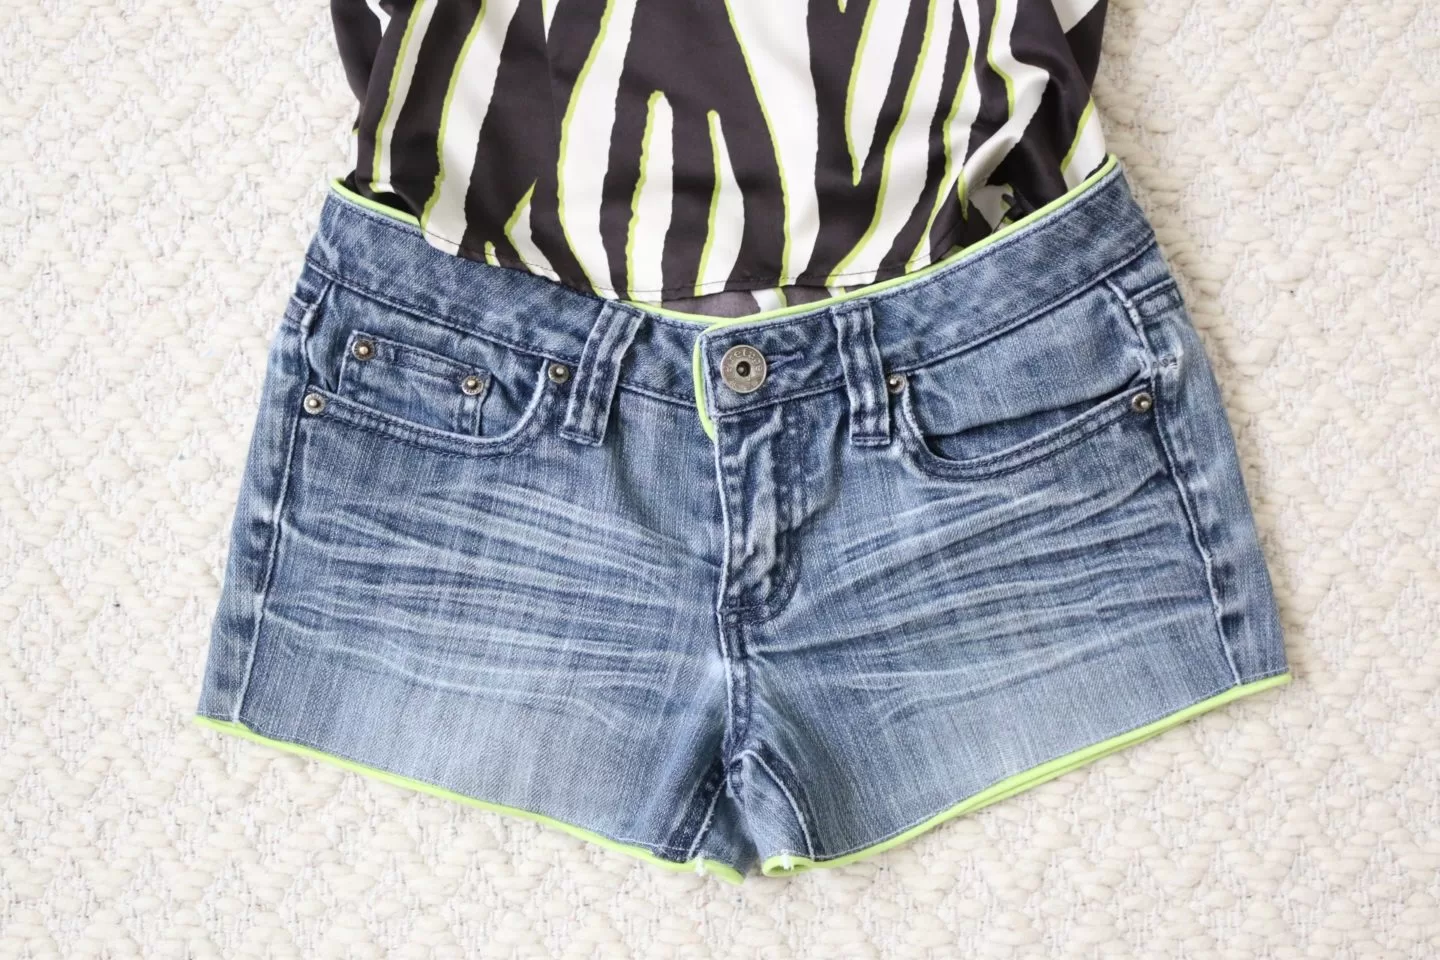 Transform your Jeans into Spicy Shorts!